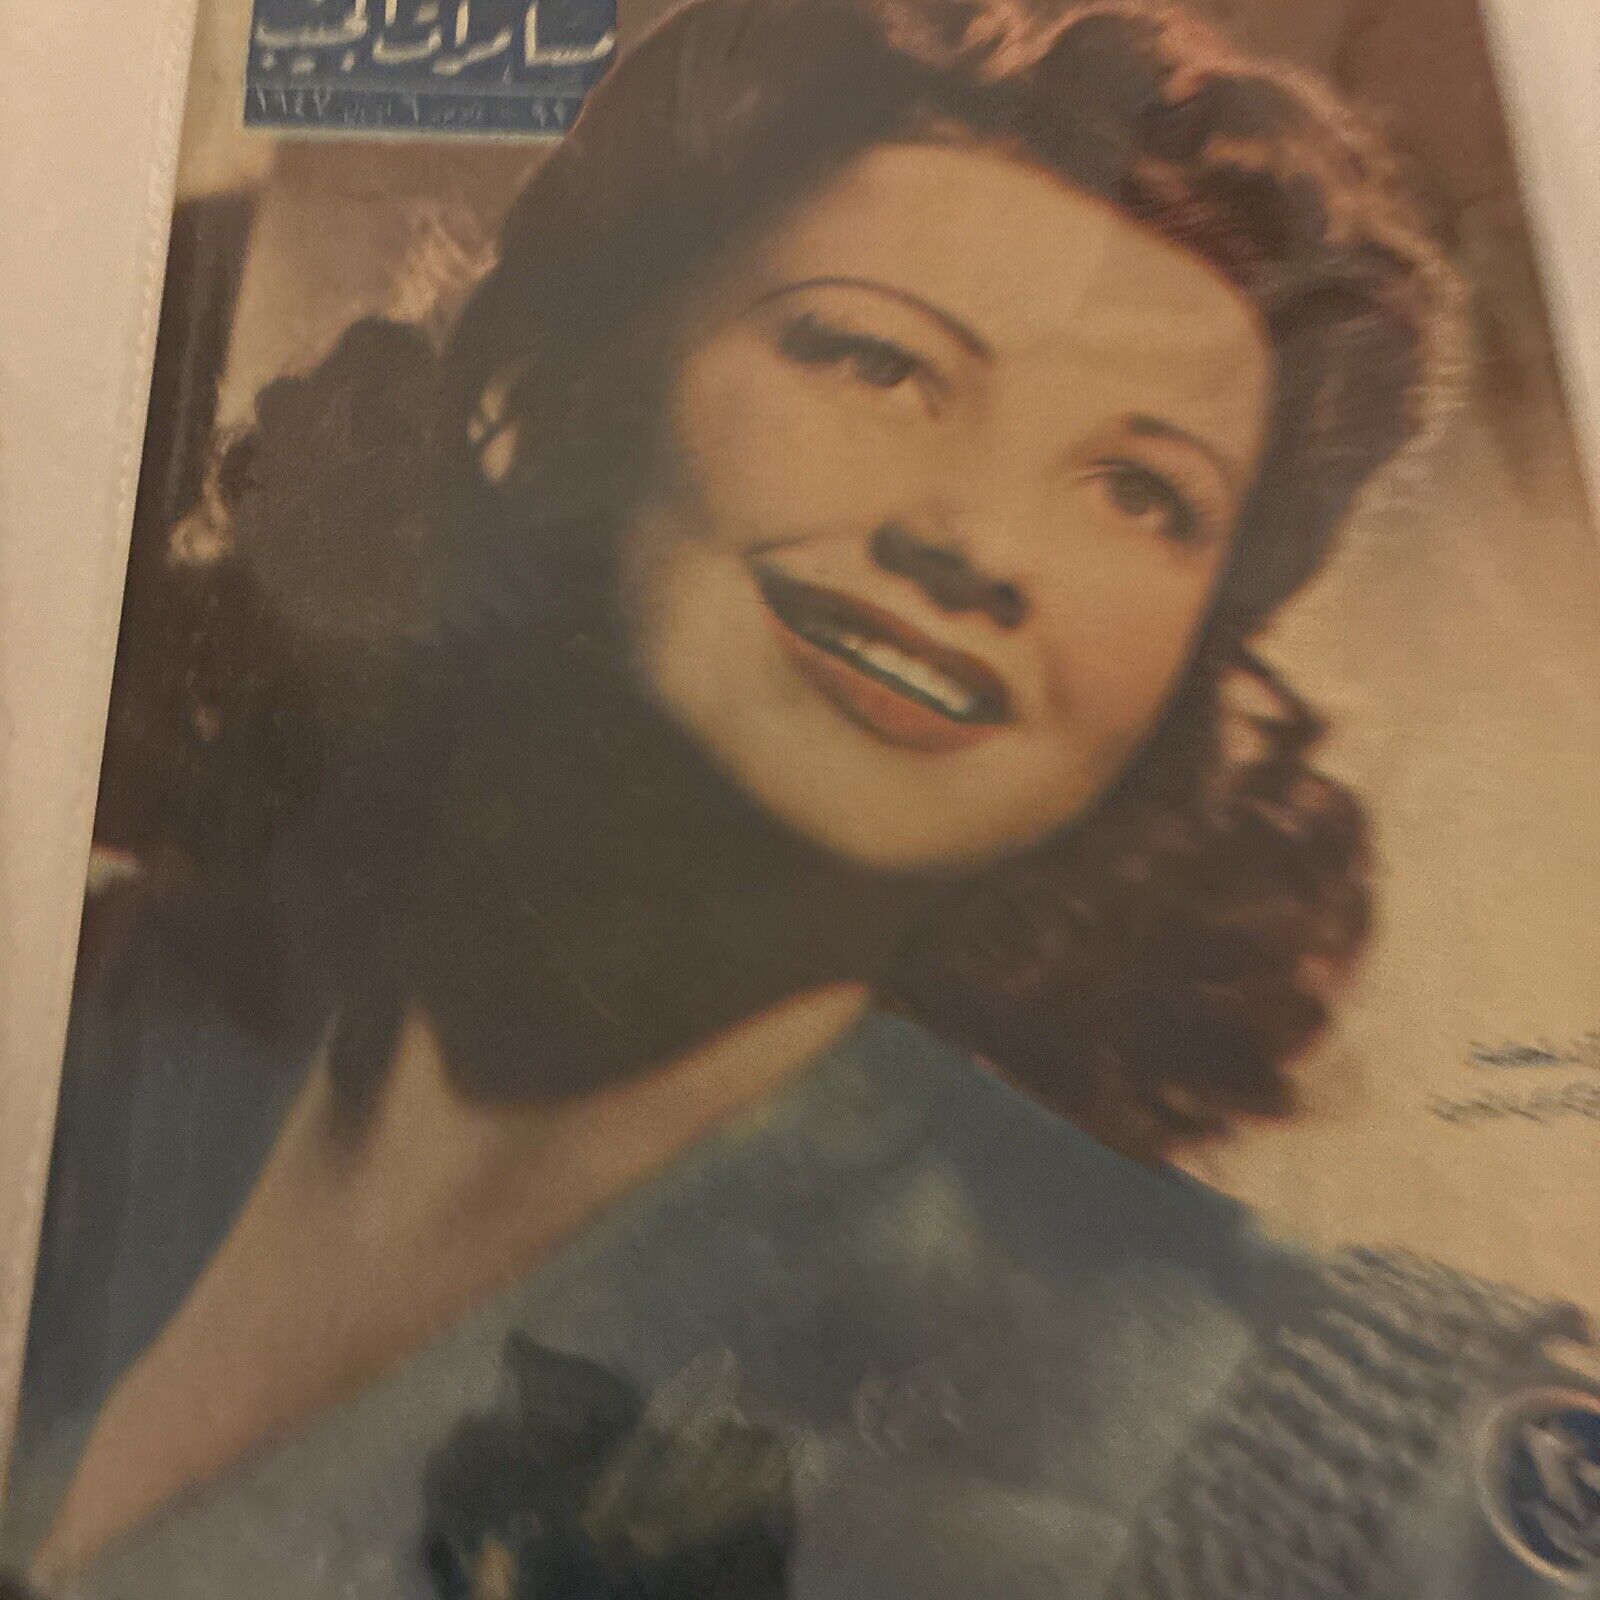 1947 Arabic Magazine Actress Anne Baxter Cover Scarce Hollywood